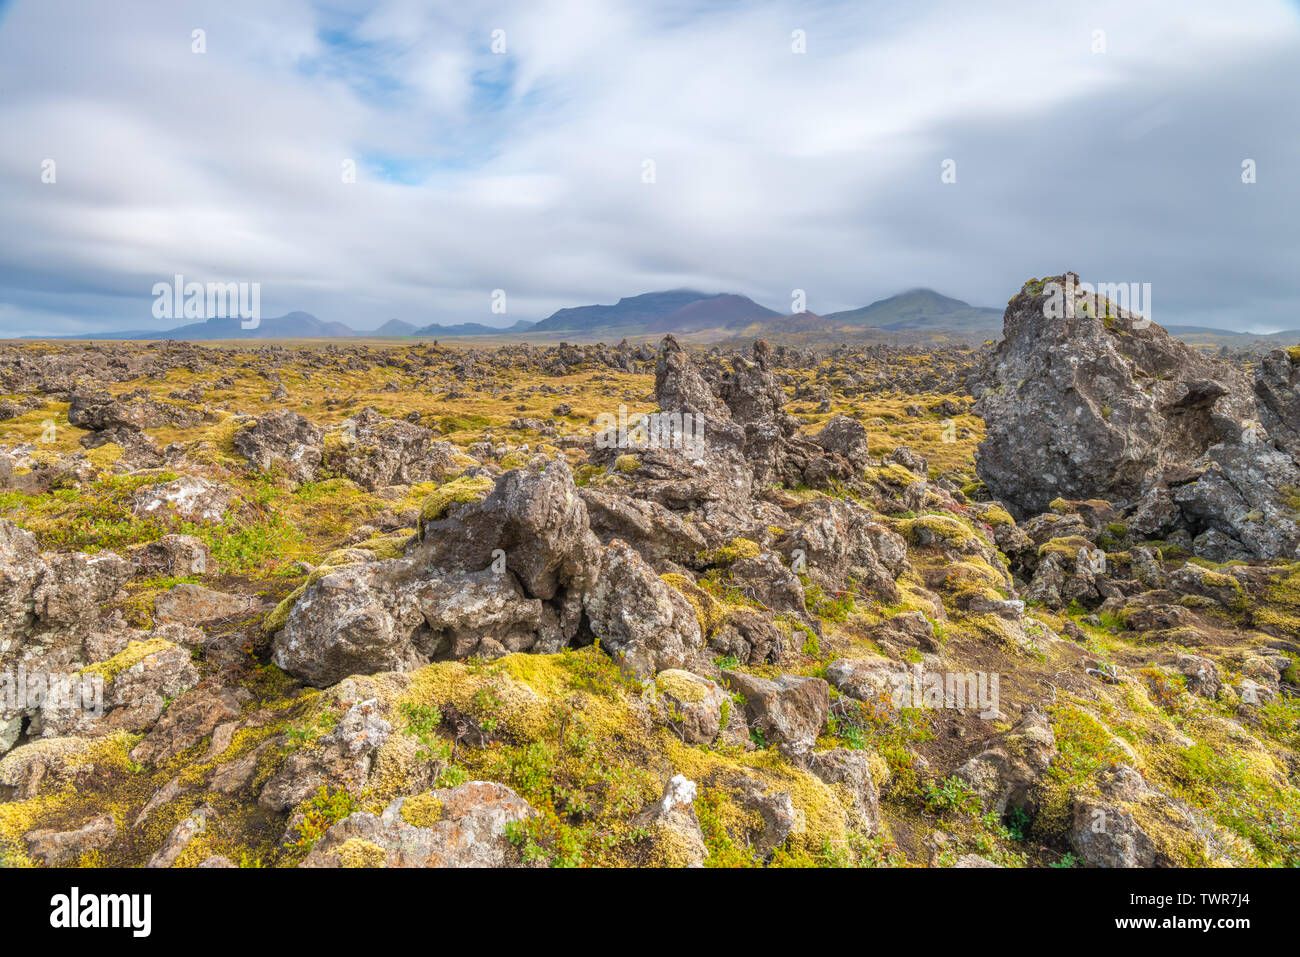 Lunar landscape of dark volcanic rock field, grass and moss carpeting the ground, and dark gloomy mountains in the background. Lord of the Rings scape Stock Photo